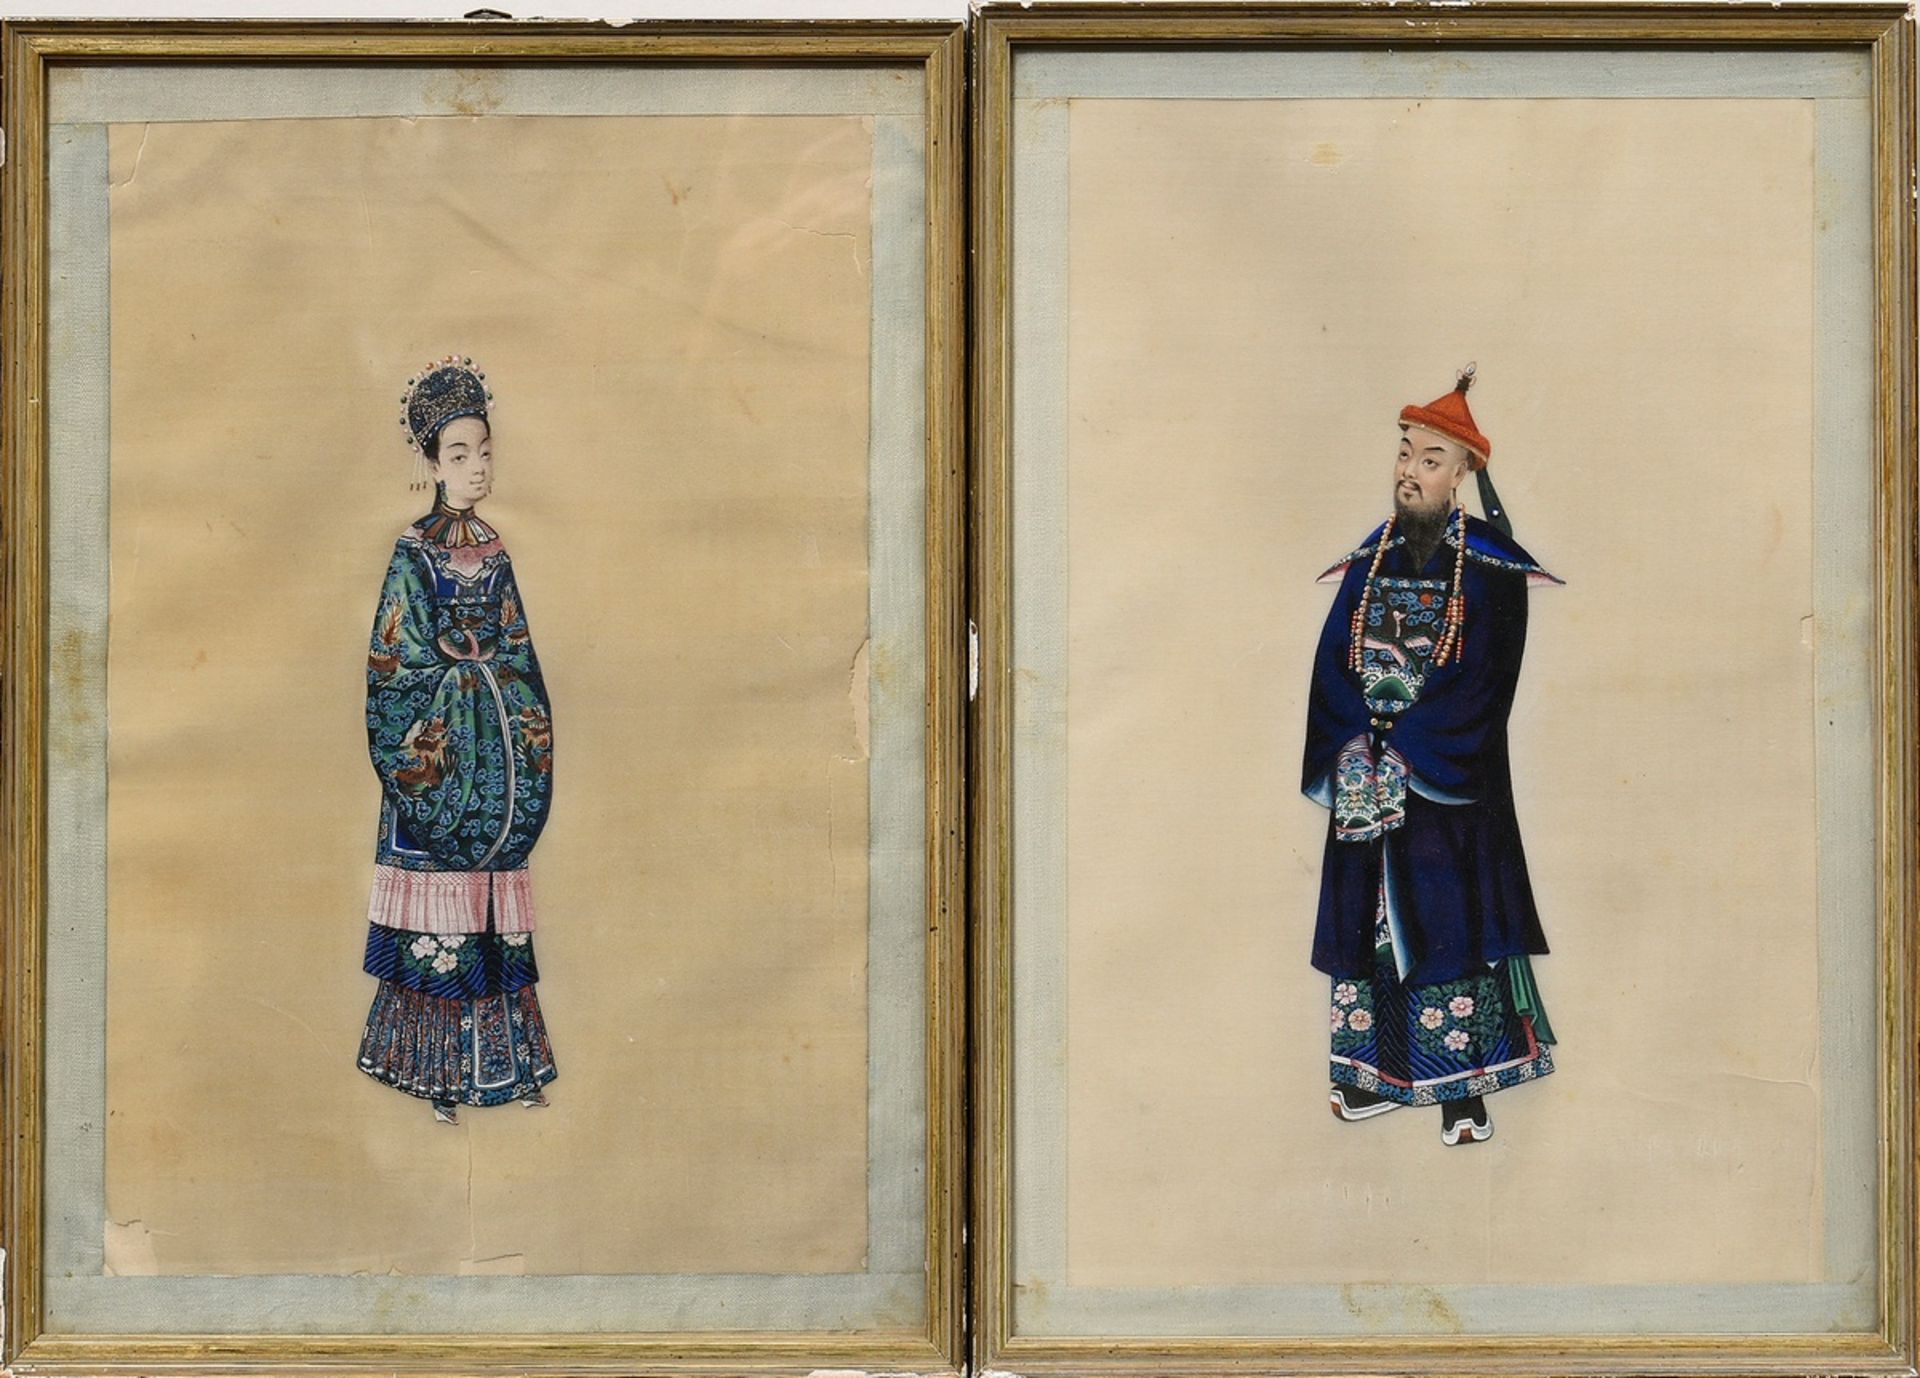 A pair of fine tsuso paintings "Mandarin and Chinese lady", gouache on marbled paper, Canton c. 183